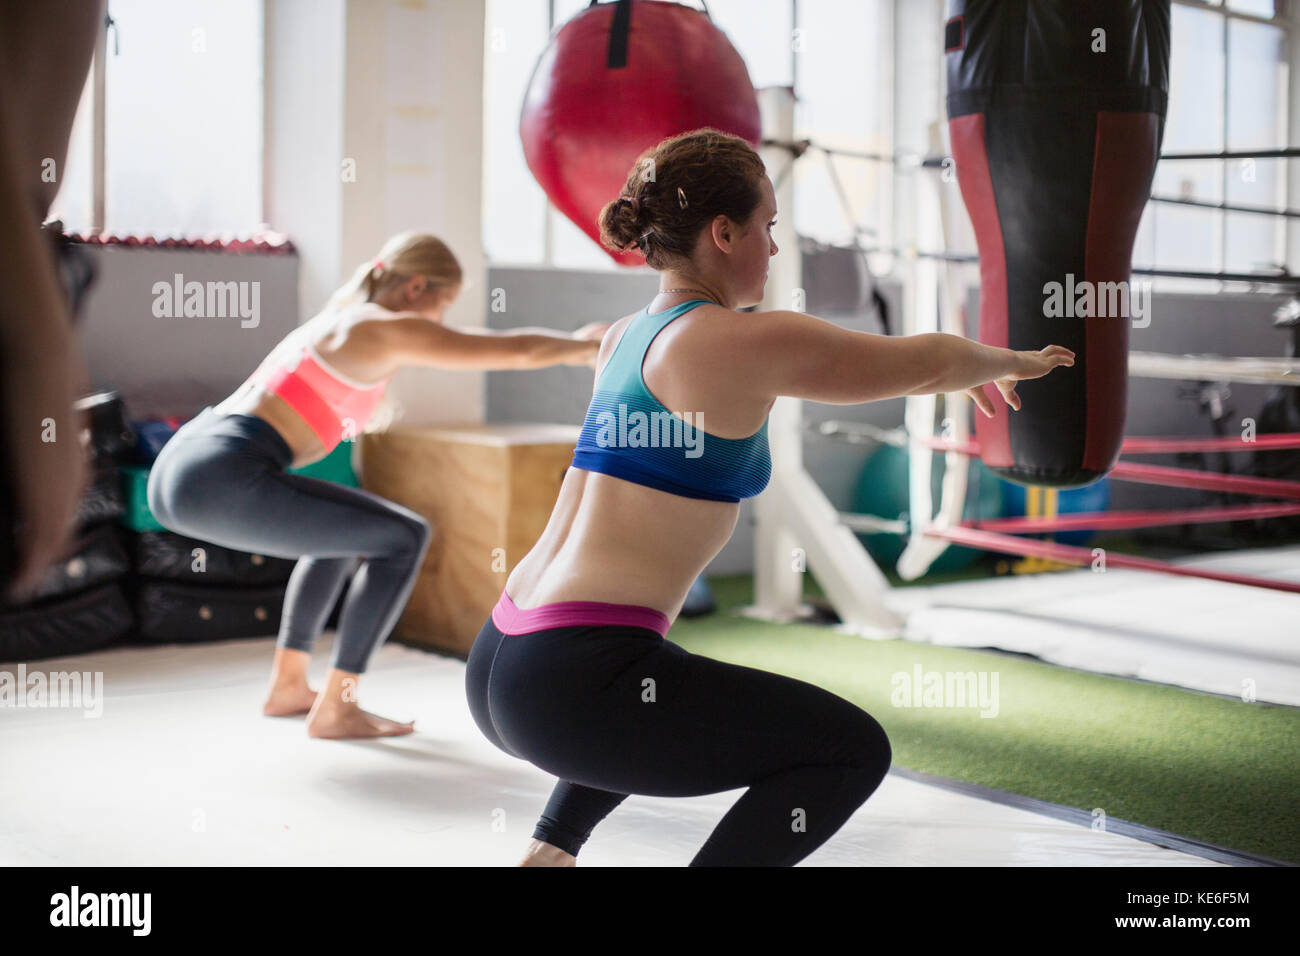 Young women doing squats next to boxing ring in gym Stock Photo